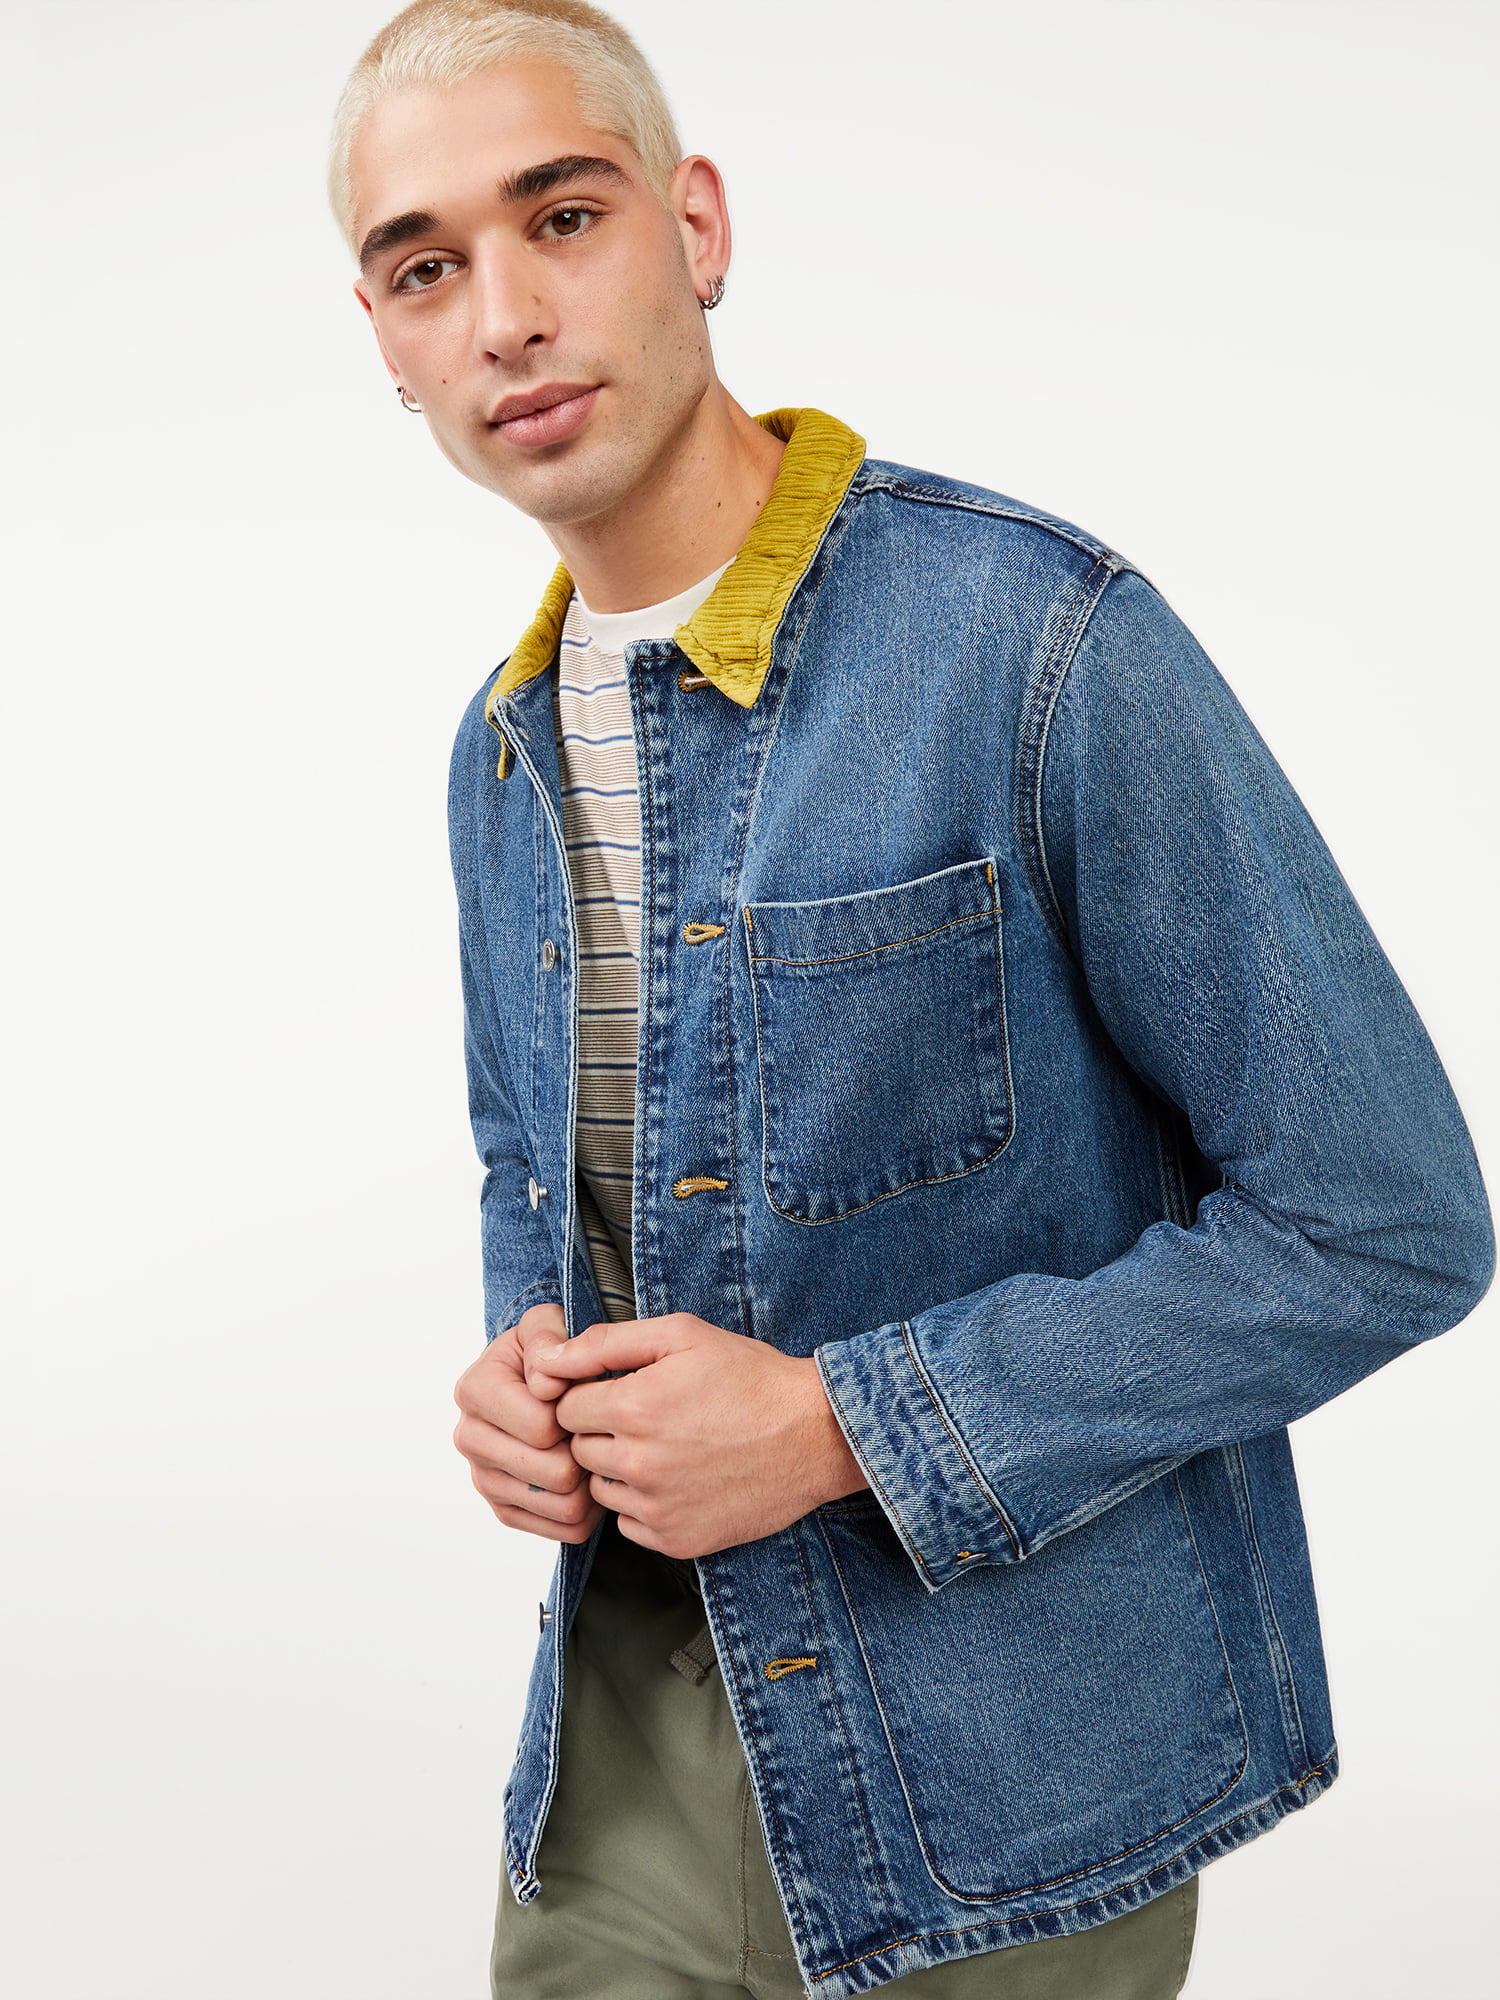 Free Assembly Men's Work Jacket with Corduroy Collar - Walmart.com